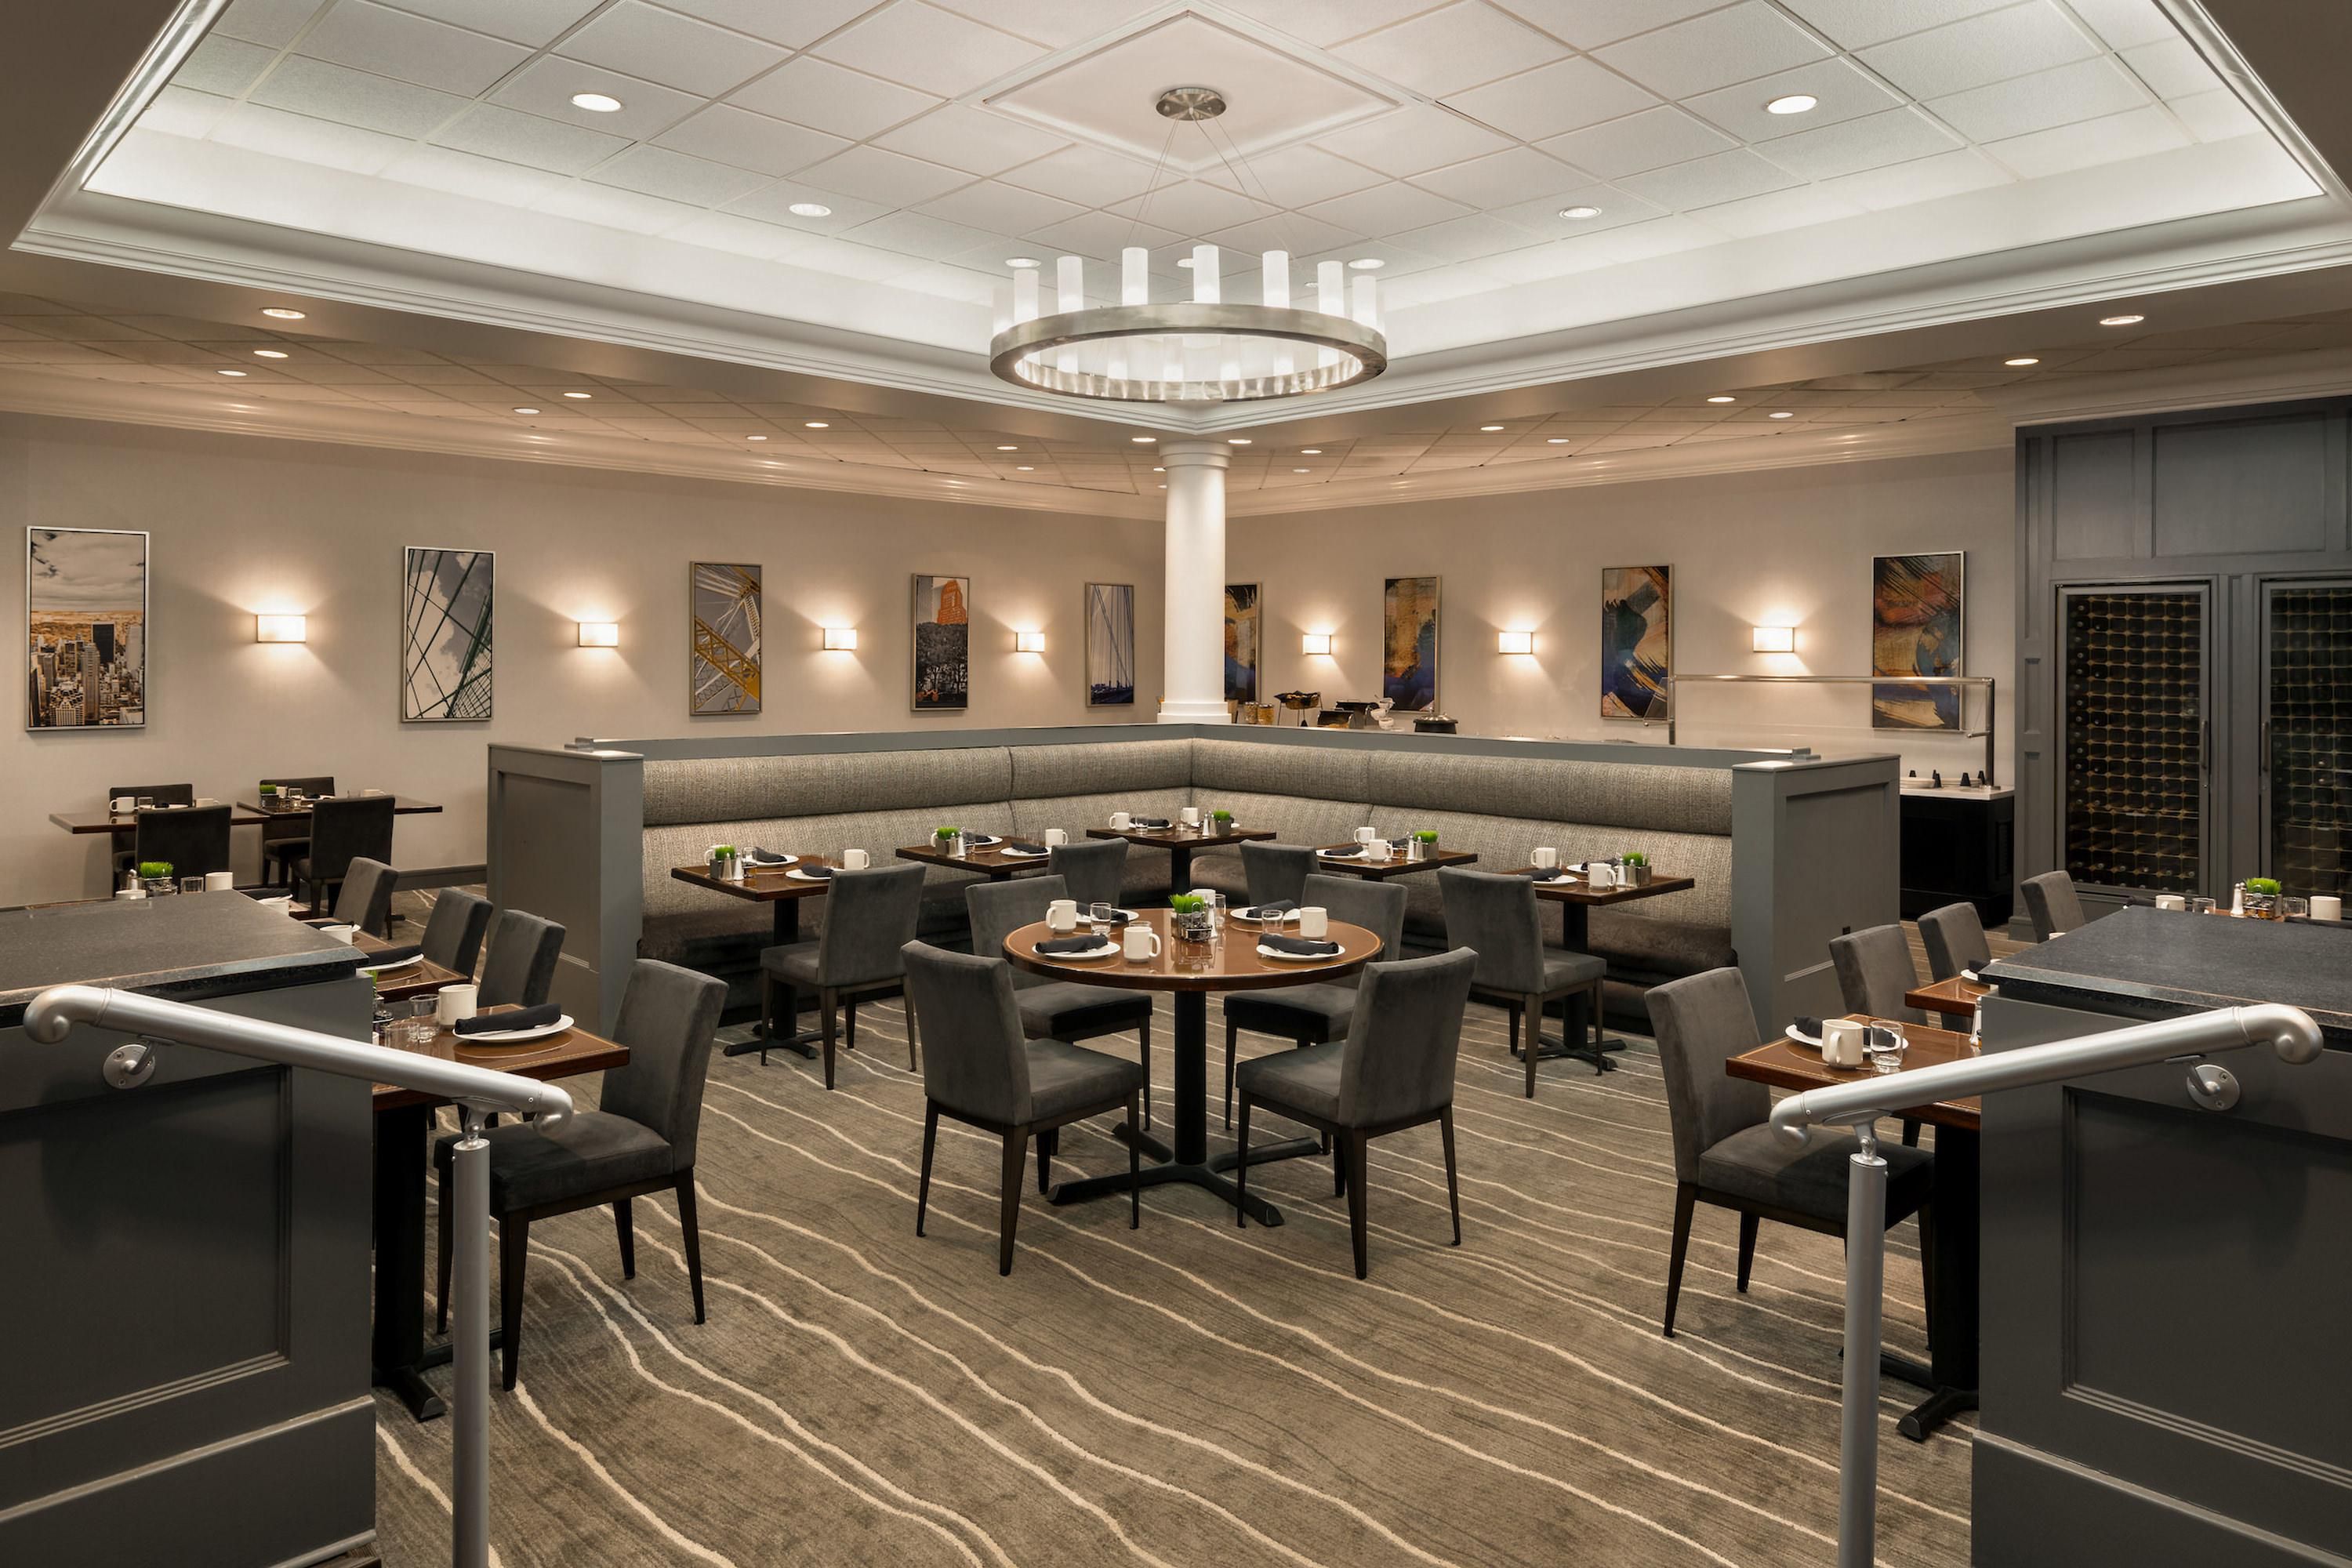 Enjoy delicious meals at our Englewood restaurant and lounge.